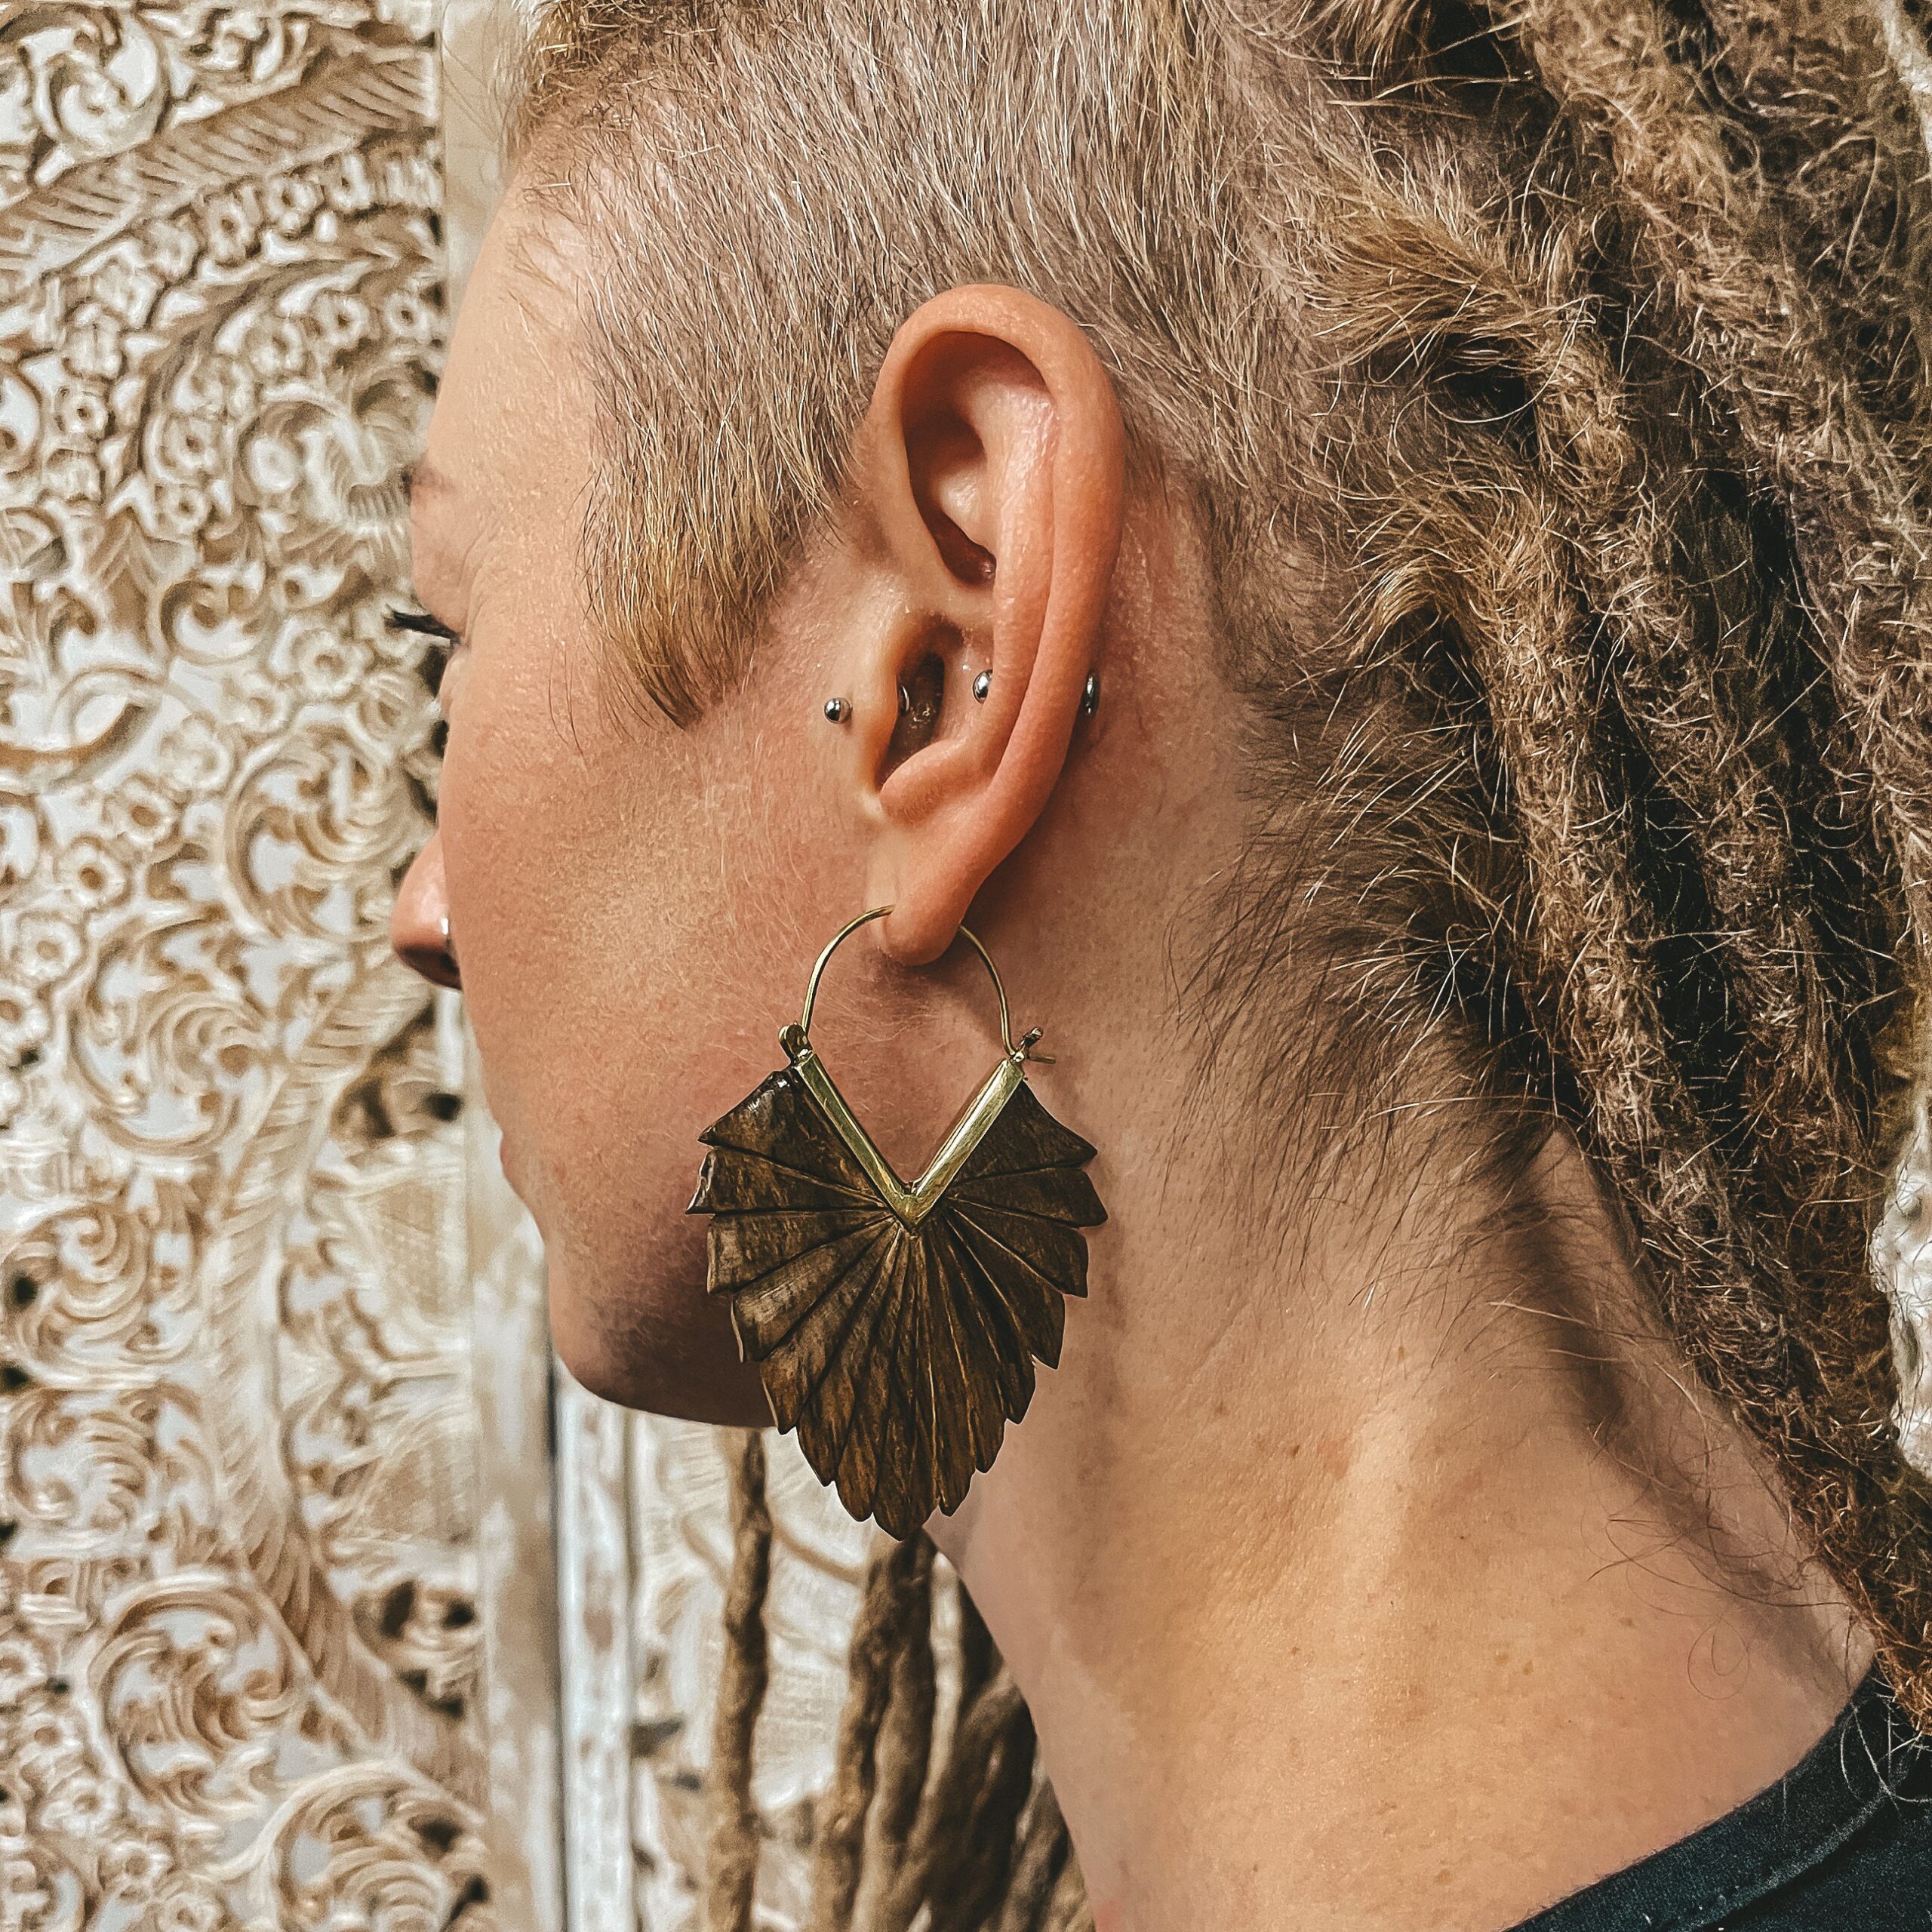 Wooden Sago Tribal Earrings Handmade Ethnic Carved Wood with a Brass Clasp in gold colour on a blonde girl with dreadlocks and engrabed wooden distressed white backdrop boho style